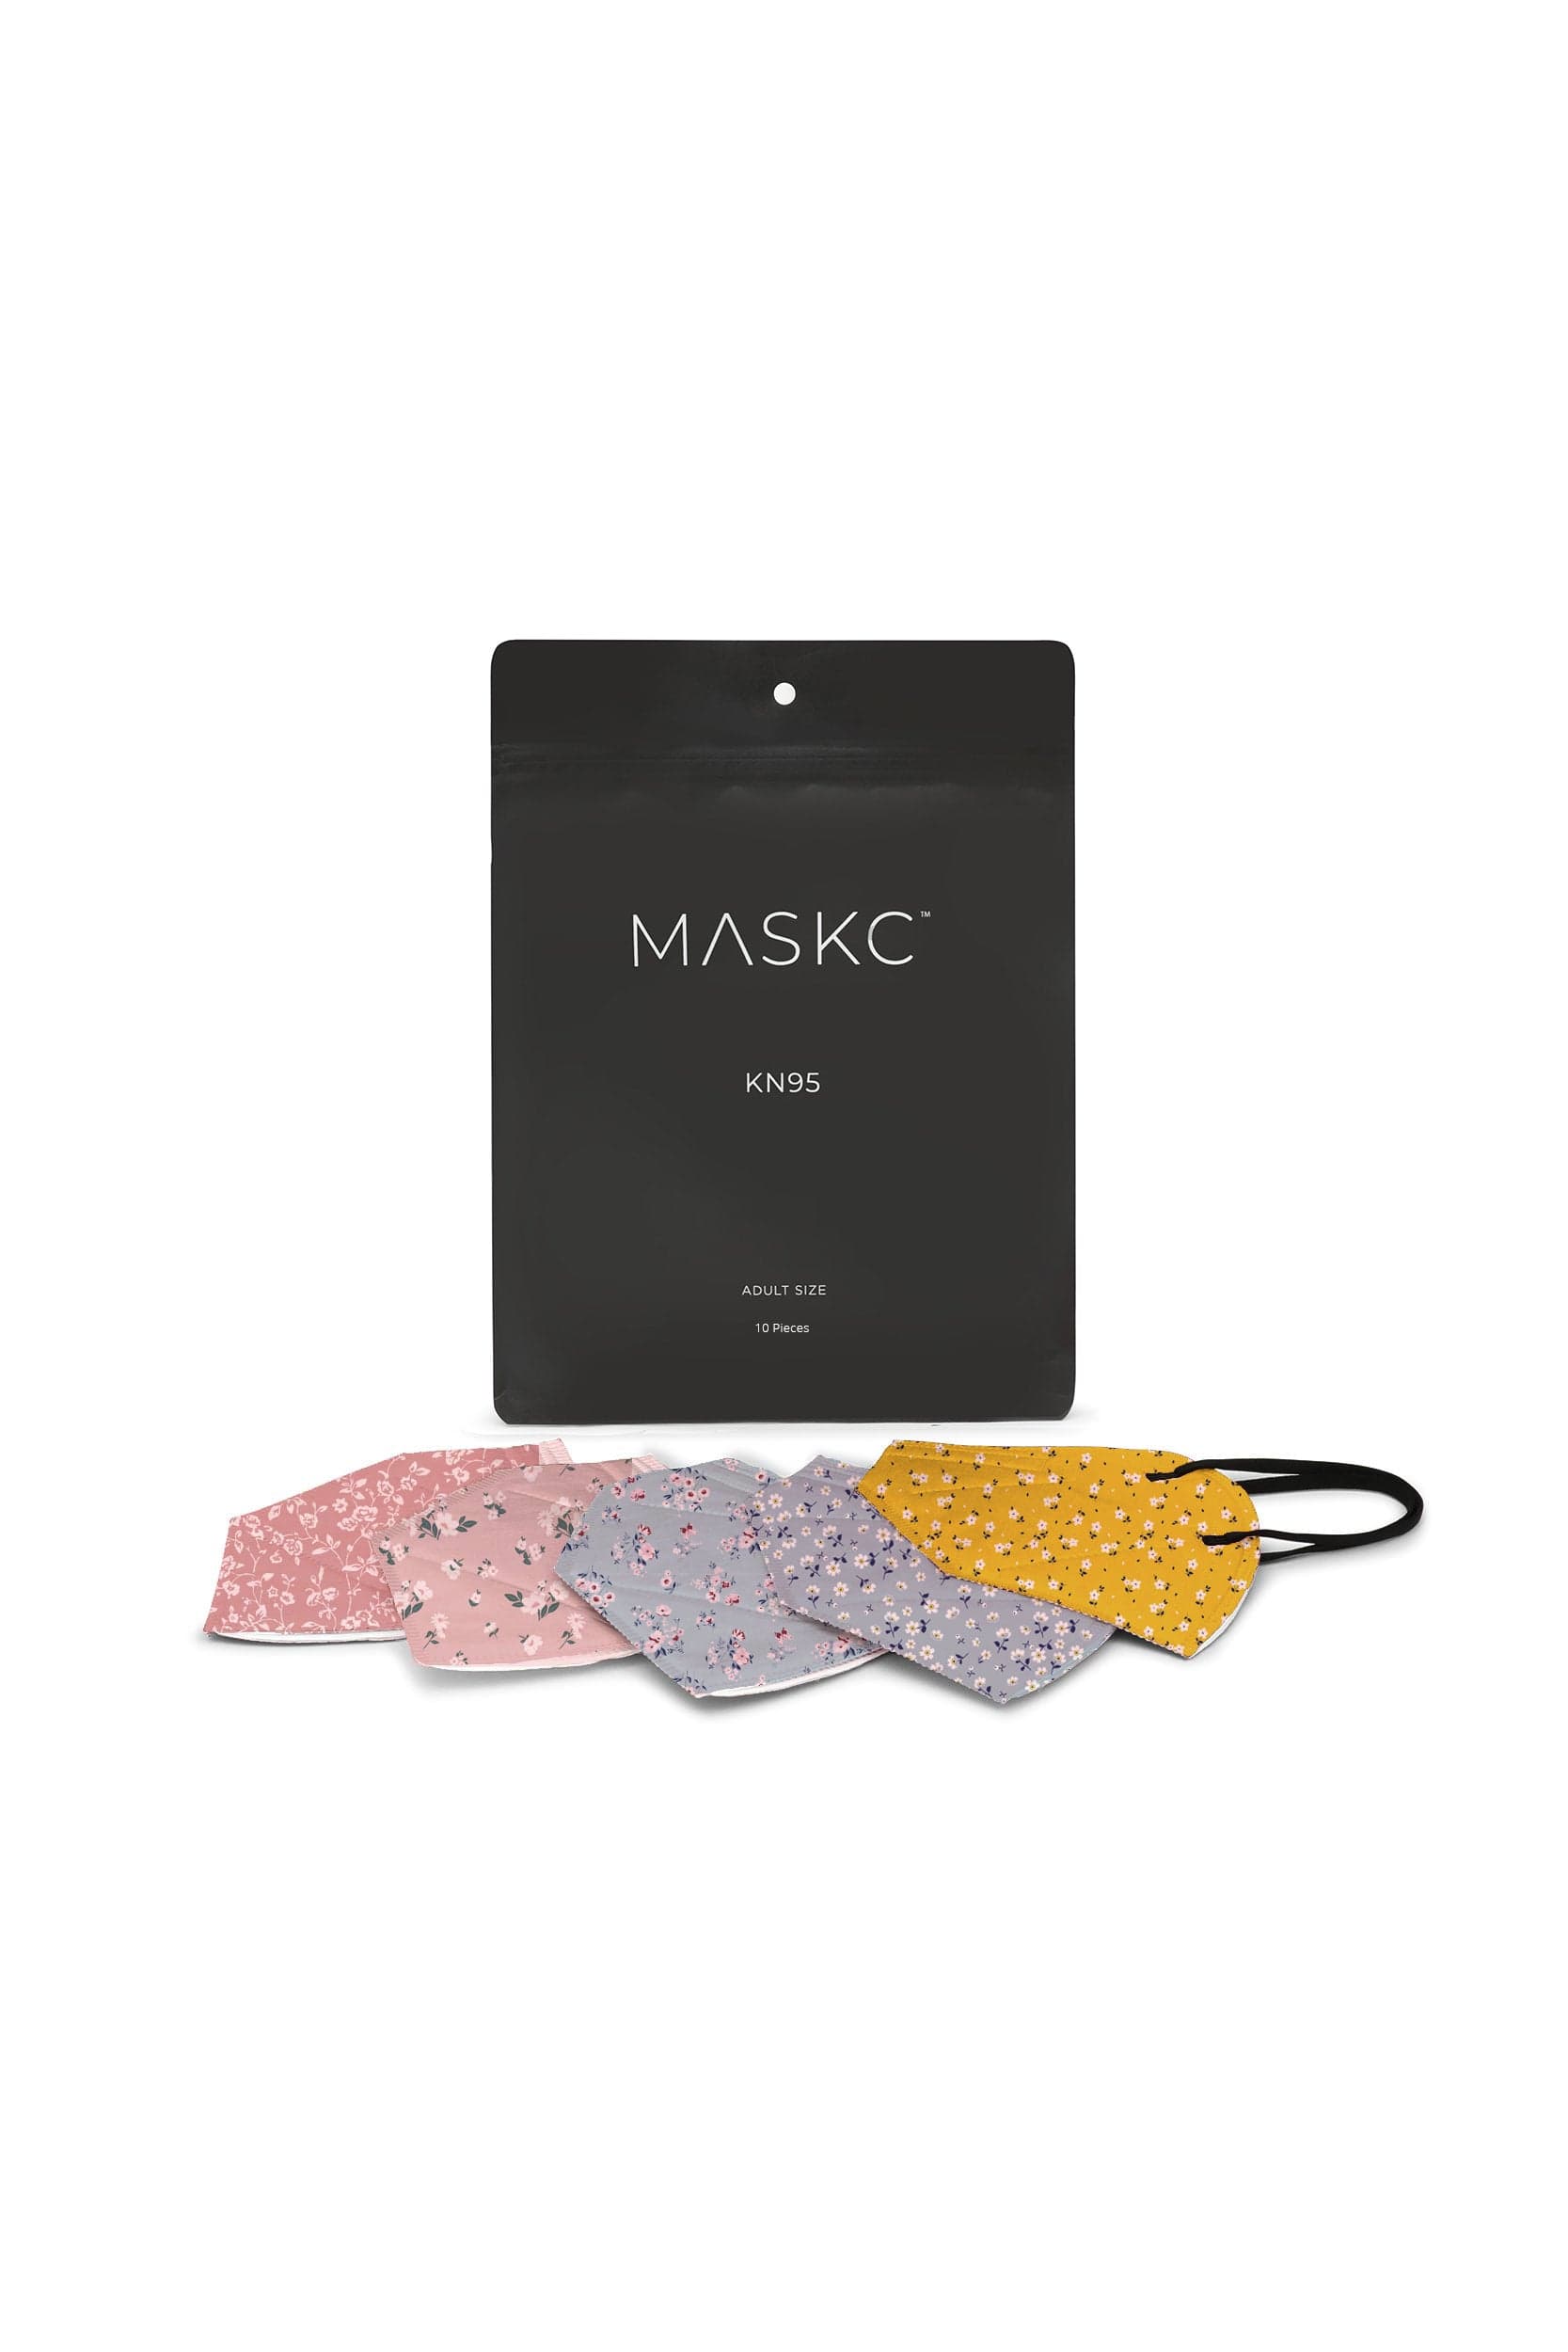 Pack of multiple variations of Floral printed KN95 face masks. Each pack contains stylish high quality face masks. 